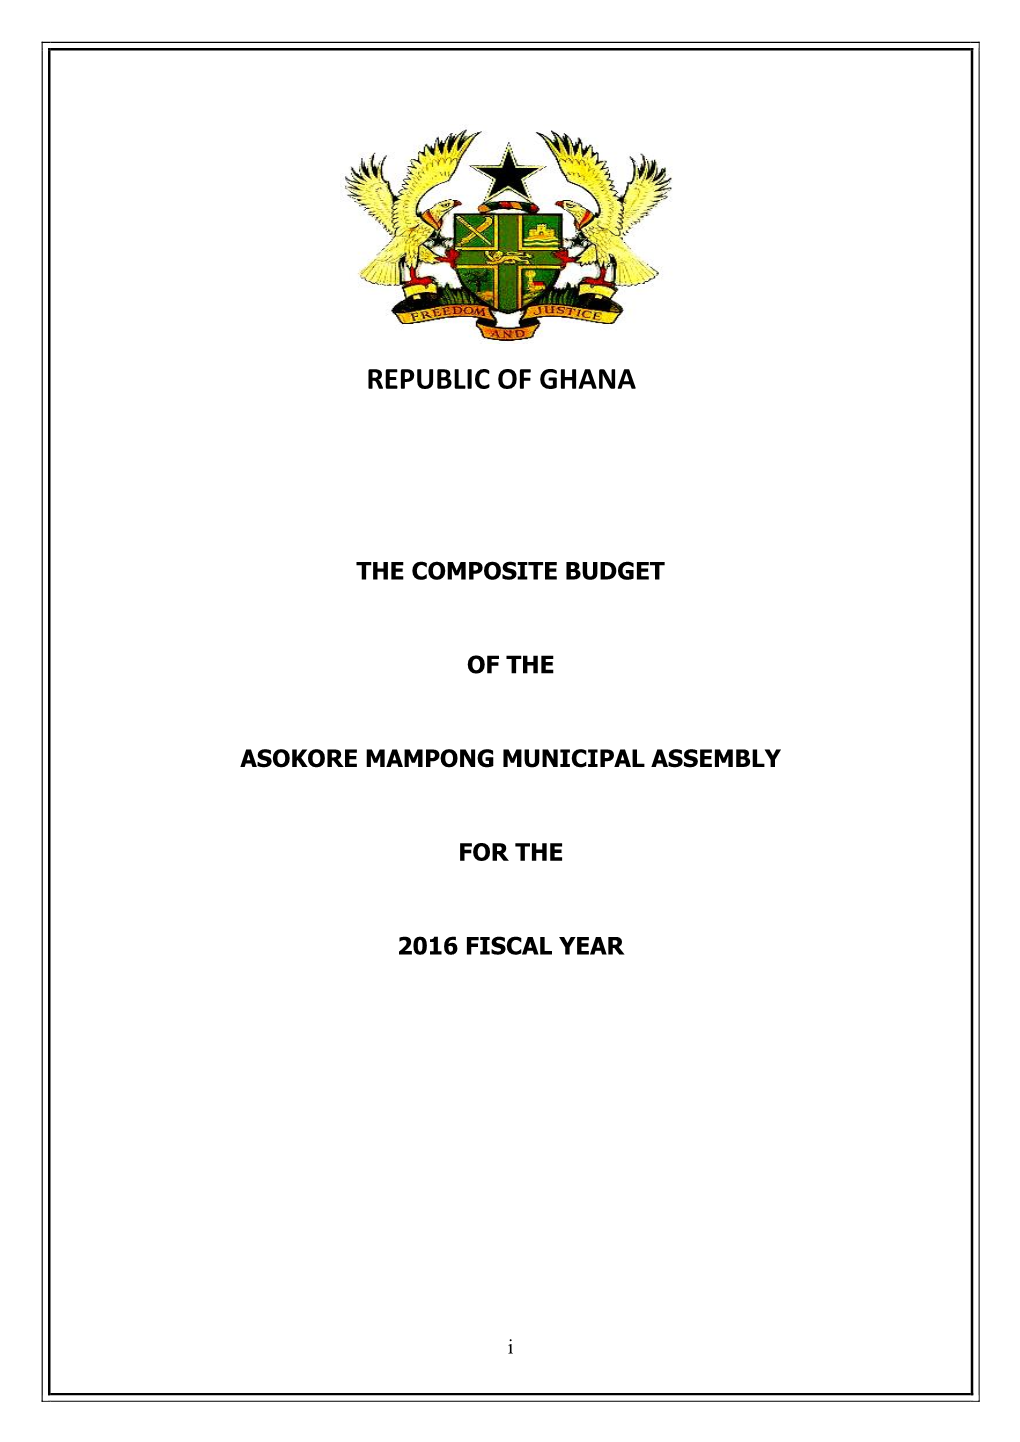 The Composite Budget of the Asokore Mampong Municipal Assembly For